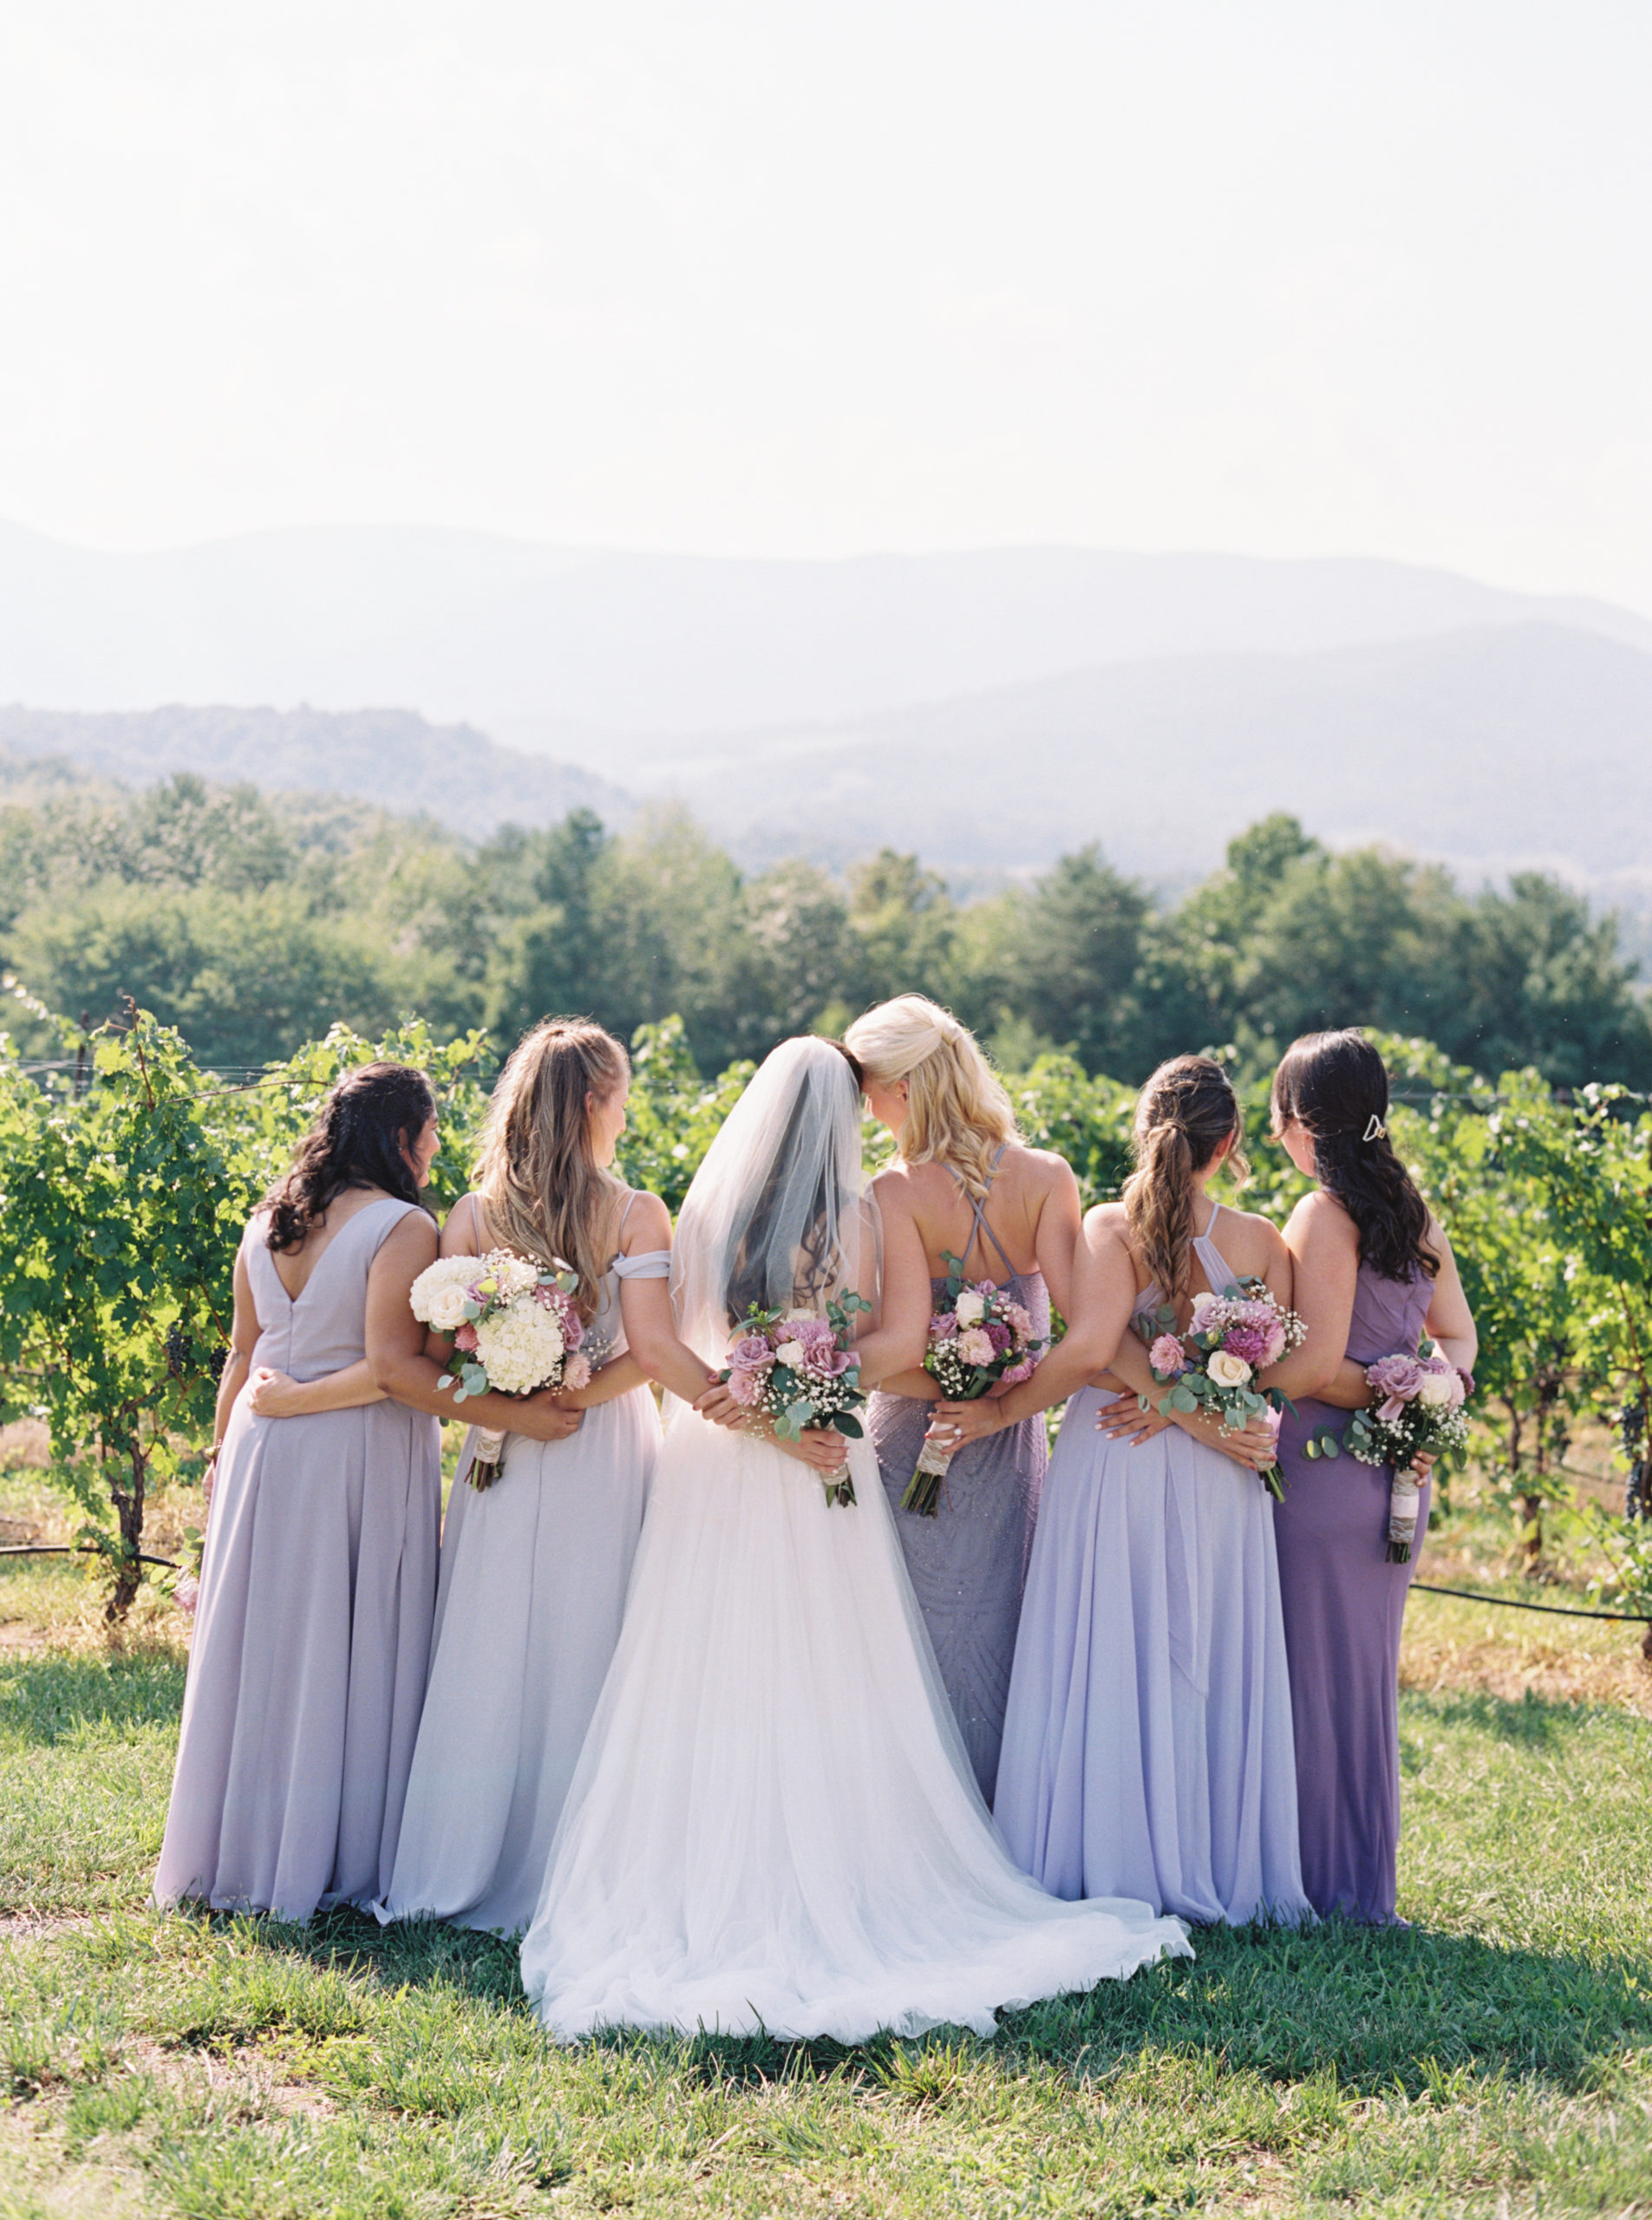 bride in white and bridesmaids in shades of purple look out over virginia vineyard